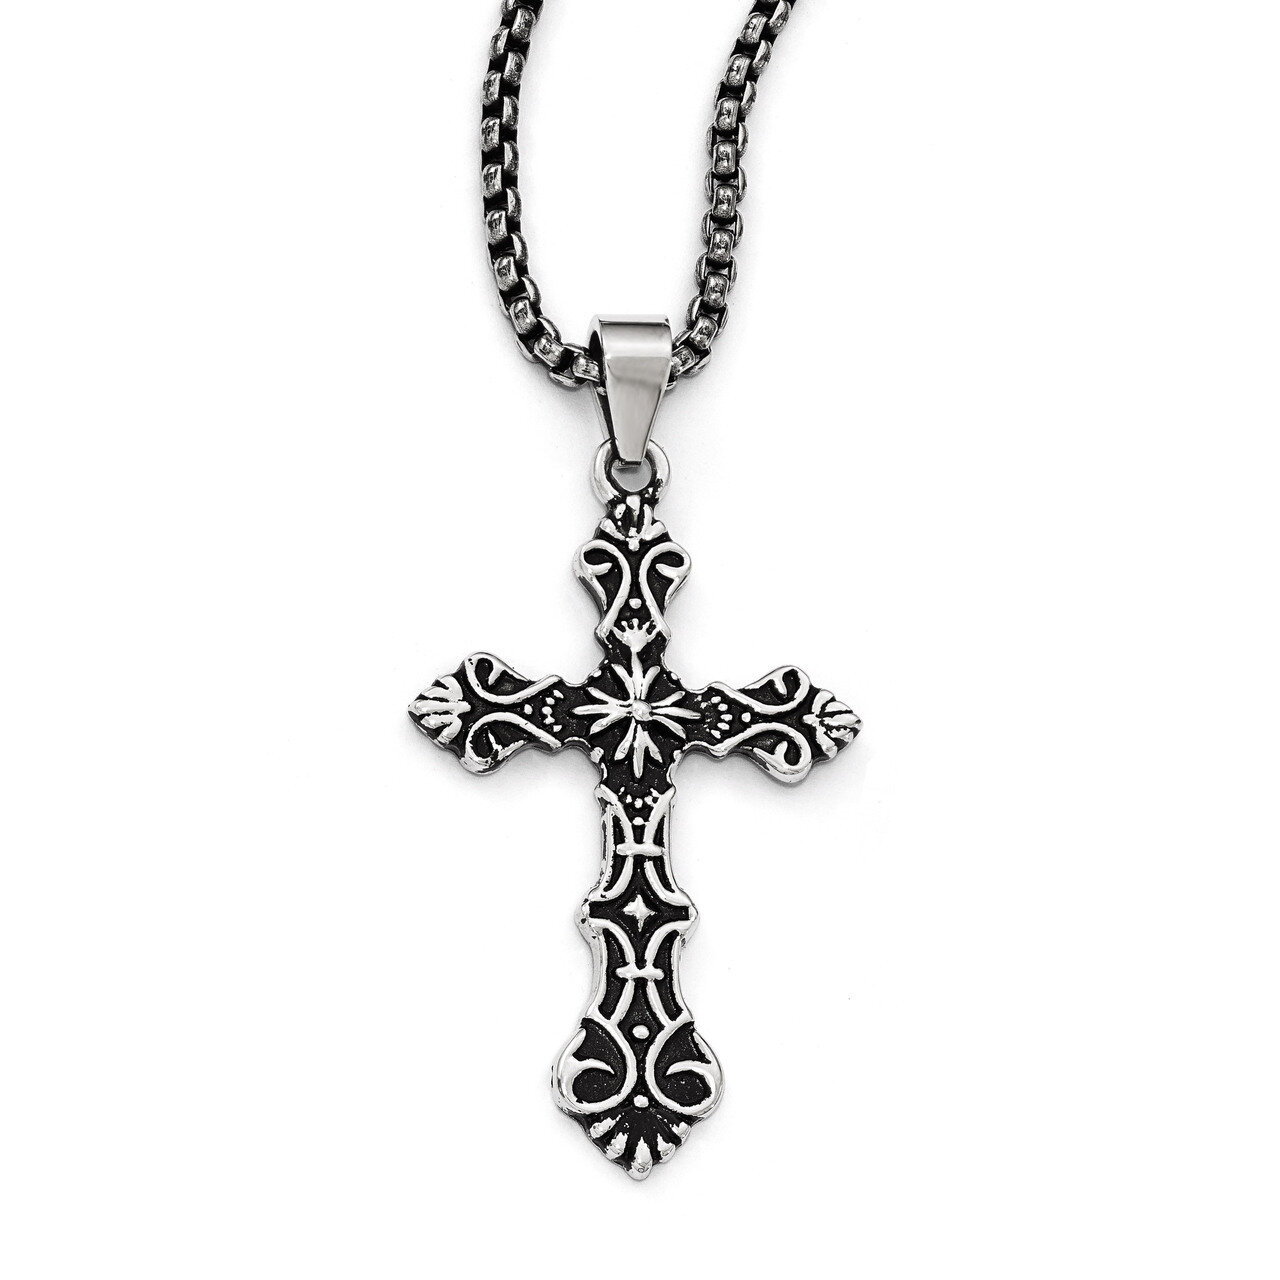 Polished and Antiqued Cross Necklace - Stainless Steel SRN1975-24